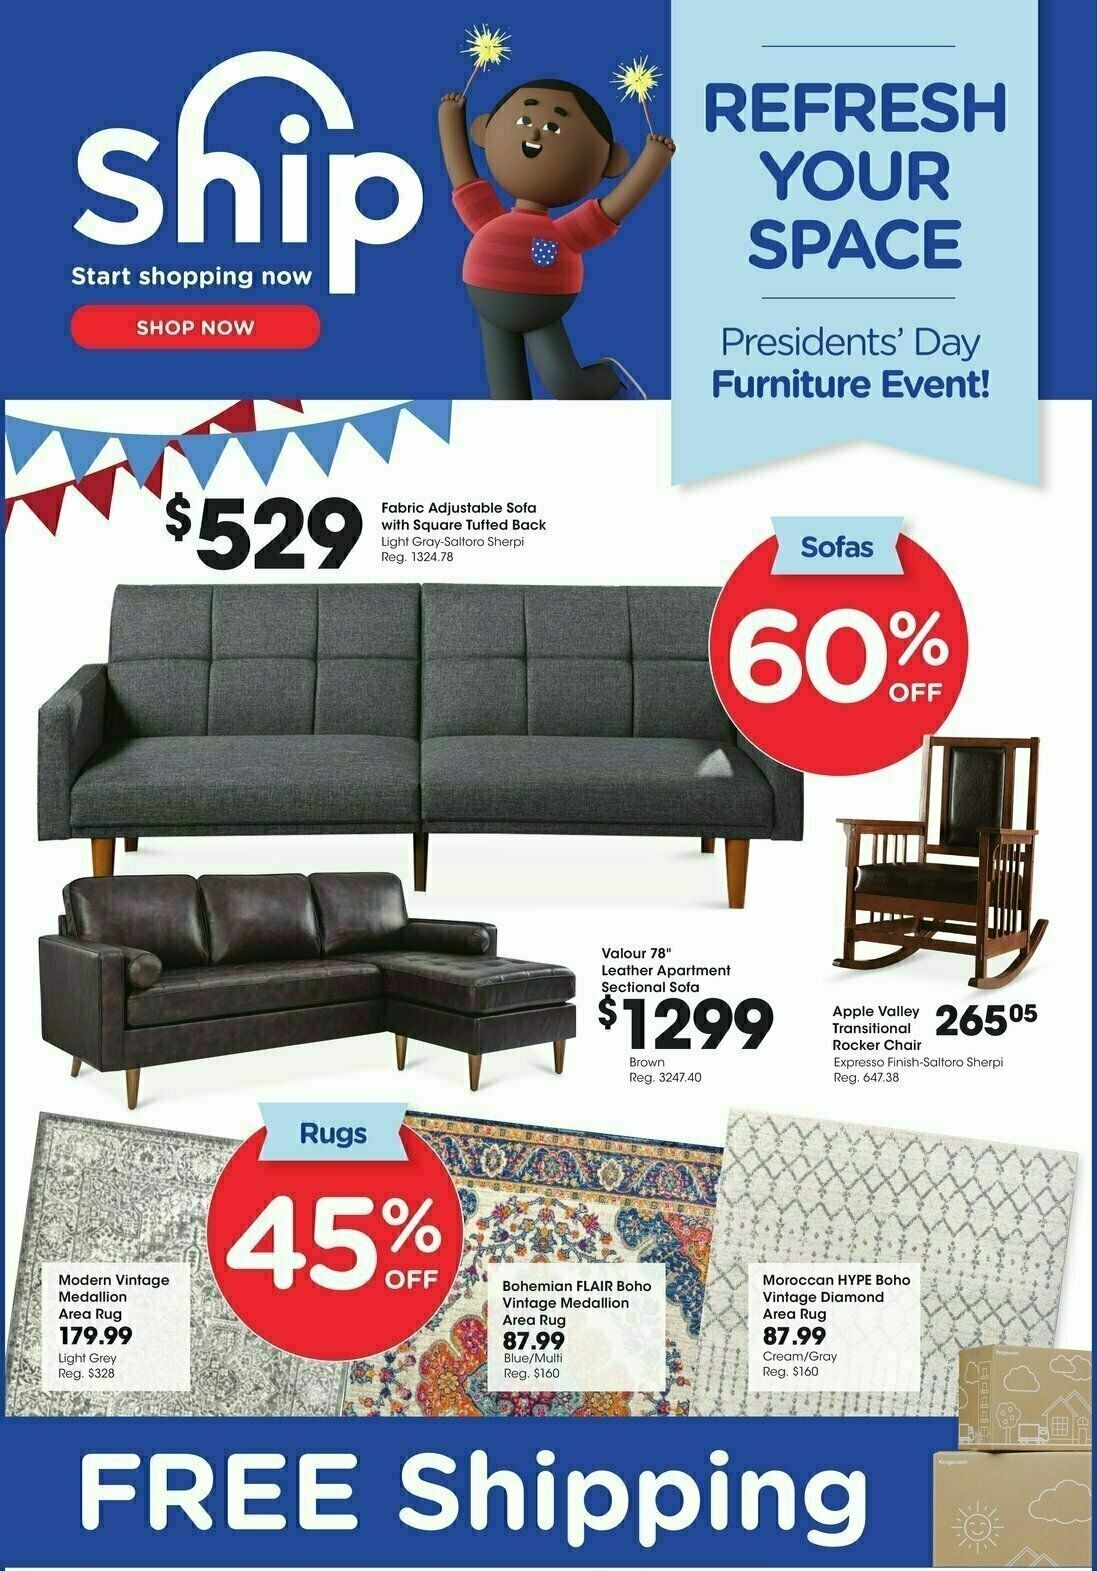 Kroger Ship to Home Weekly Ad from February 14